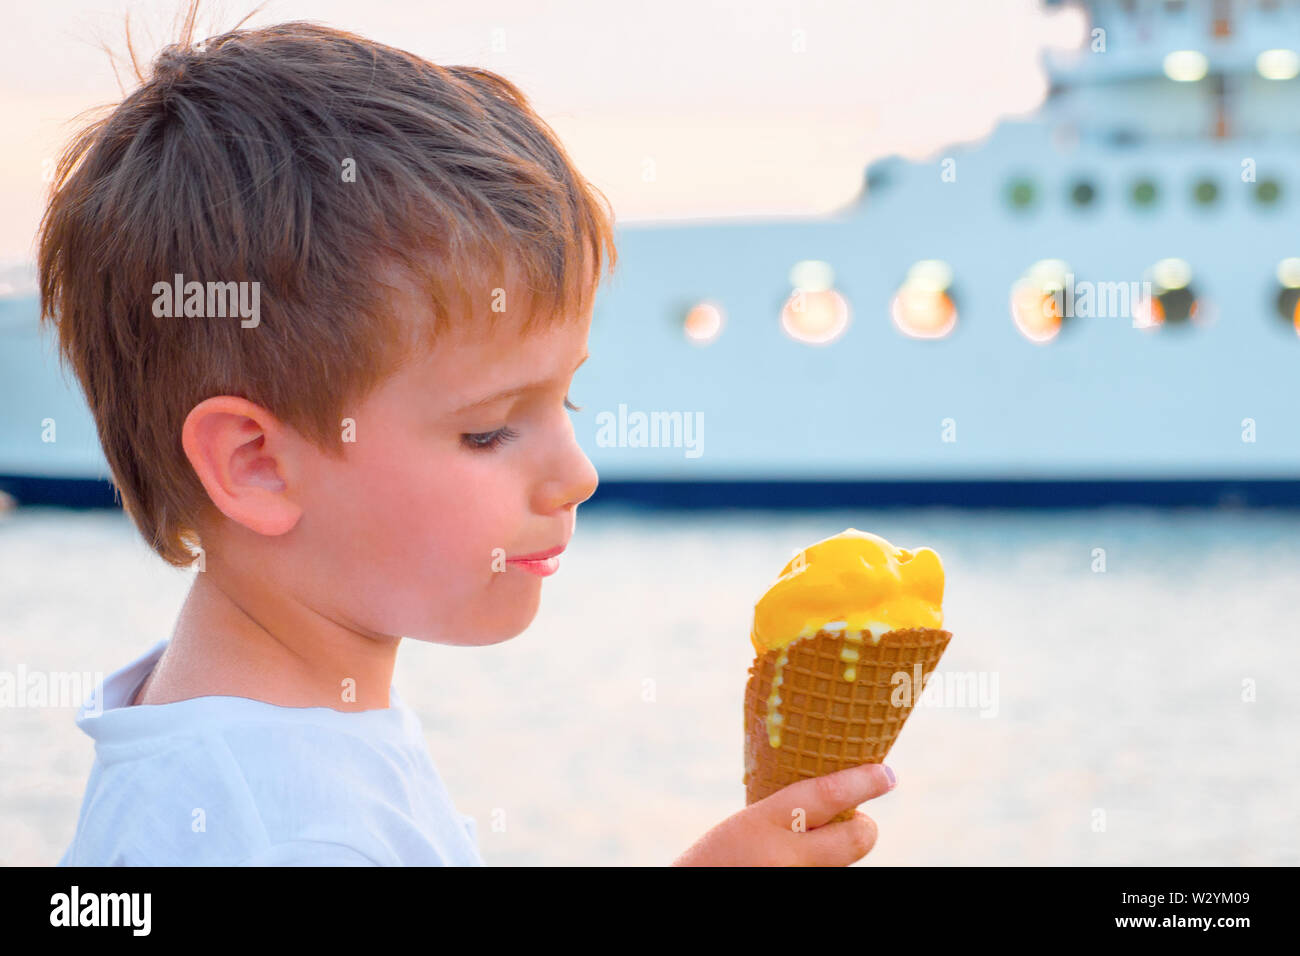 Boy with ice-cream with yacht on background. Sweet food background. Child eating ice-cream on seashore with ferry boat on background. Sweet life Stock Photo